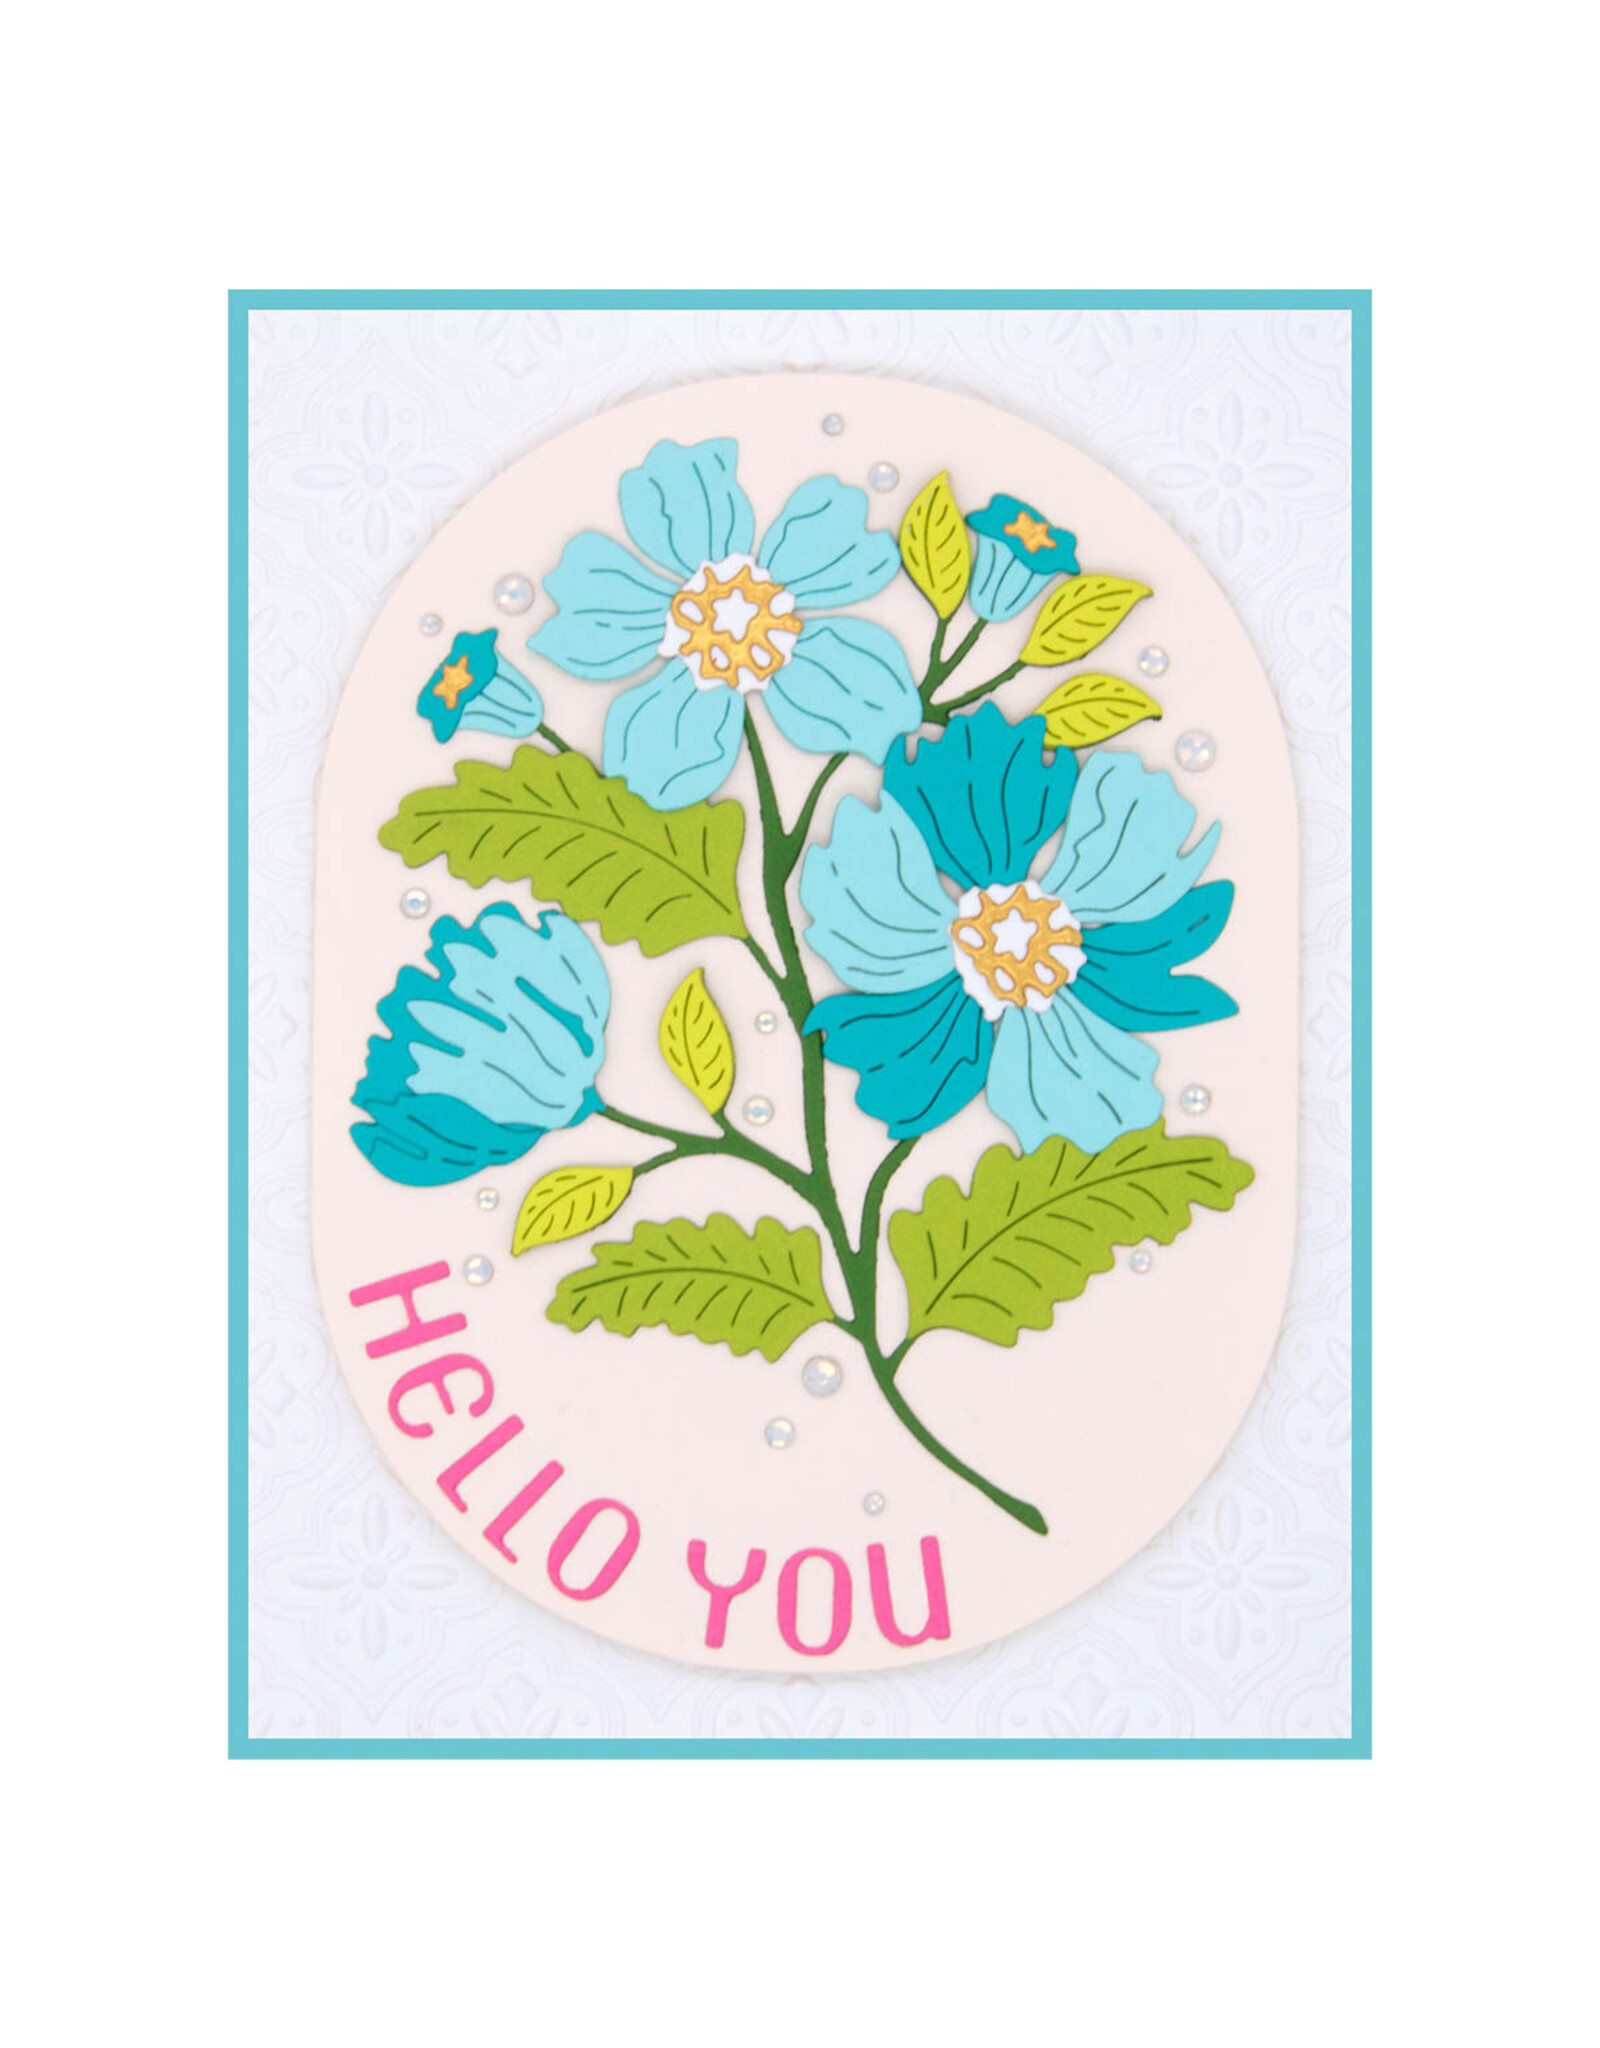 Spellbinders Stylish Ovals Collection - Stylish Oval Hello You Floral Etched Dies